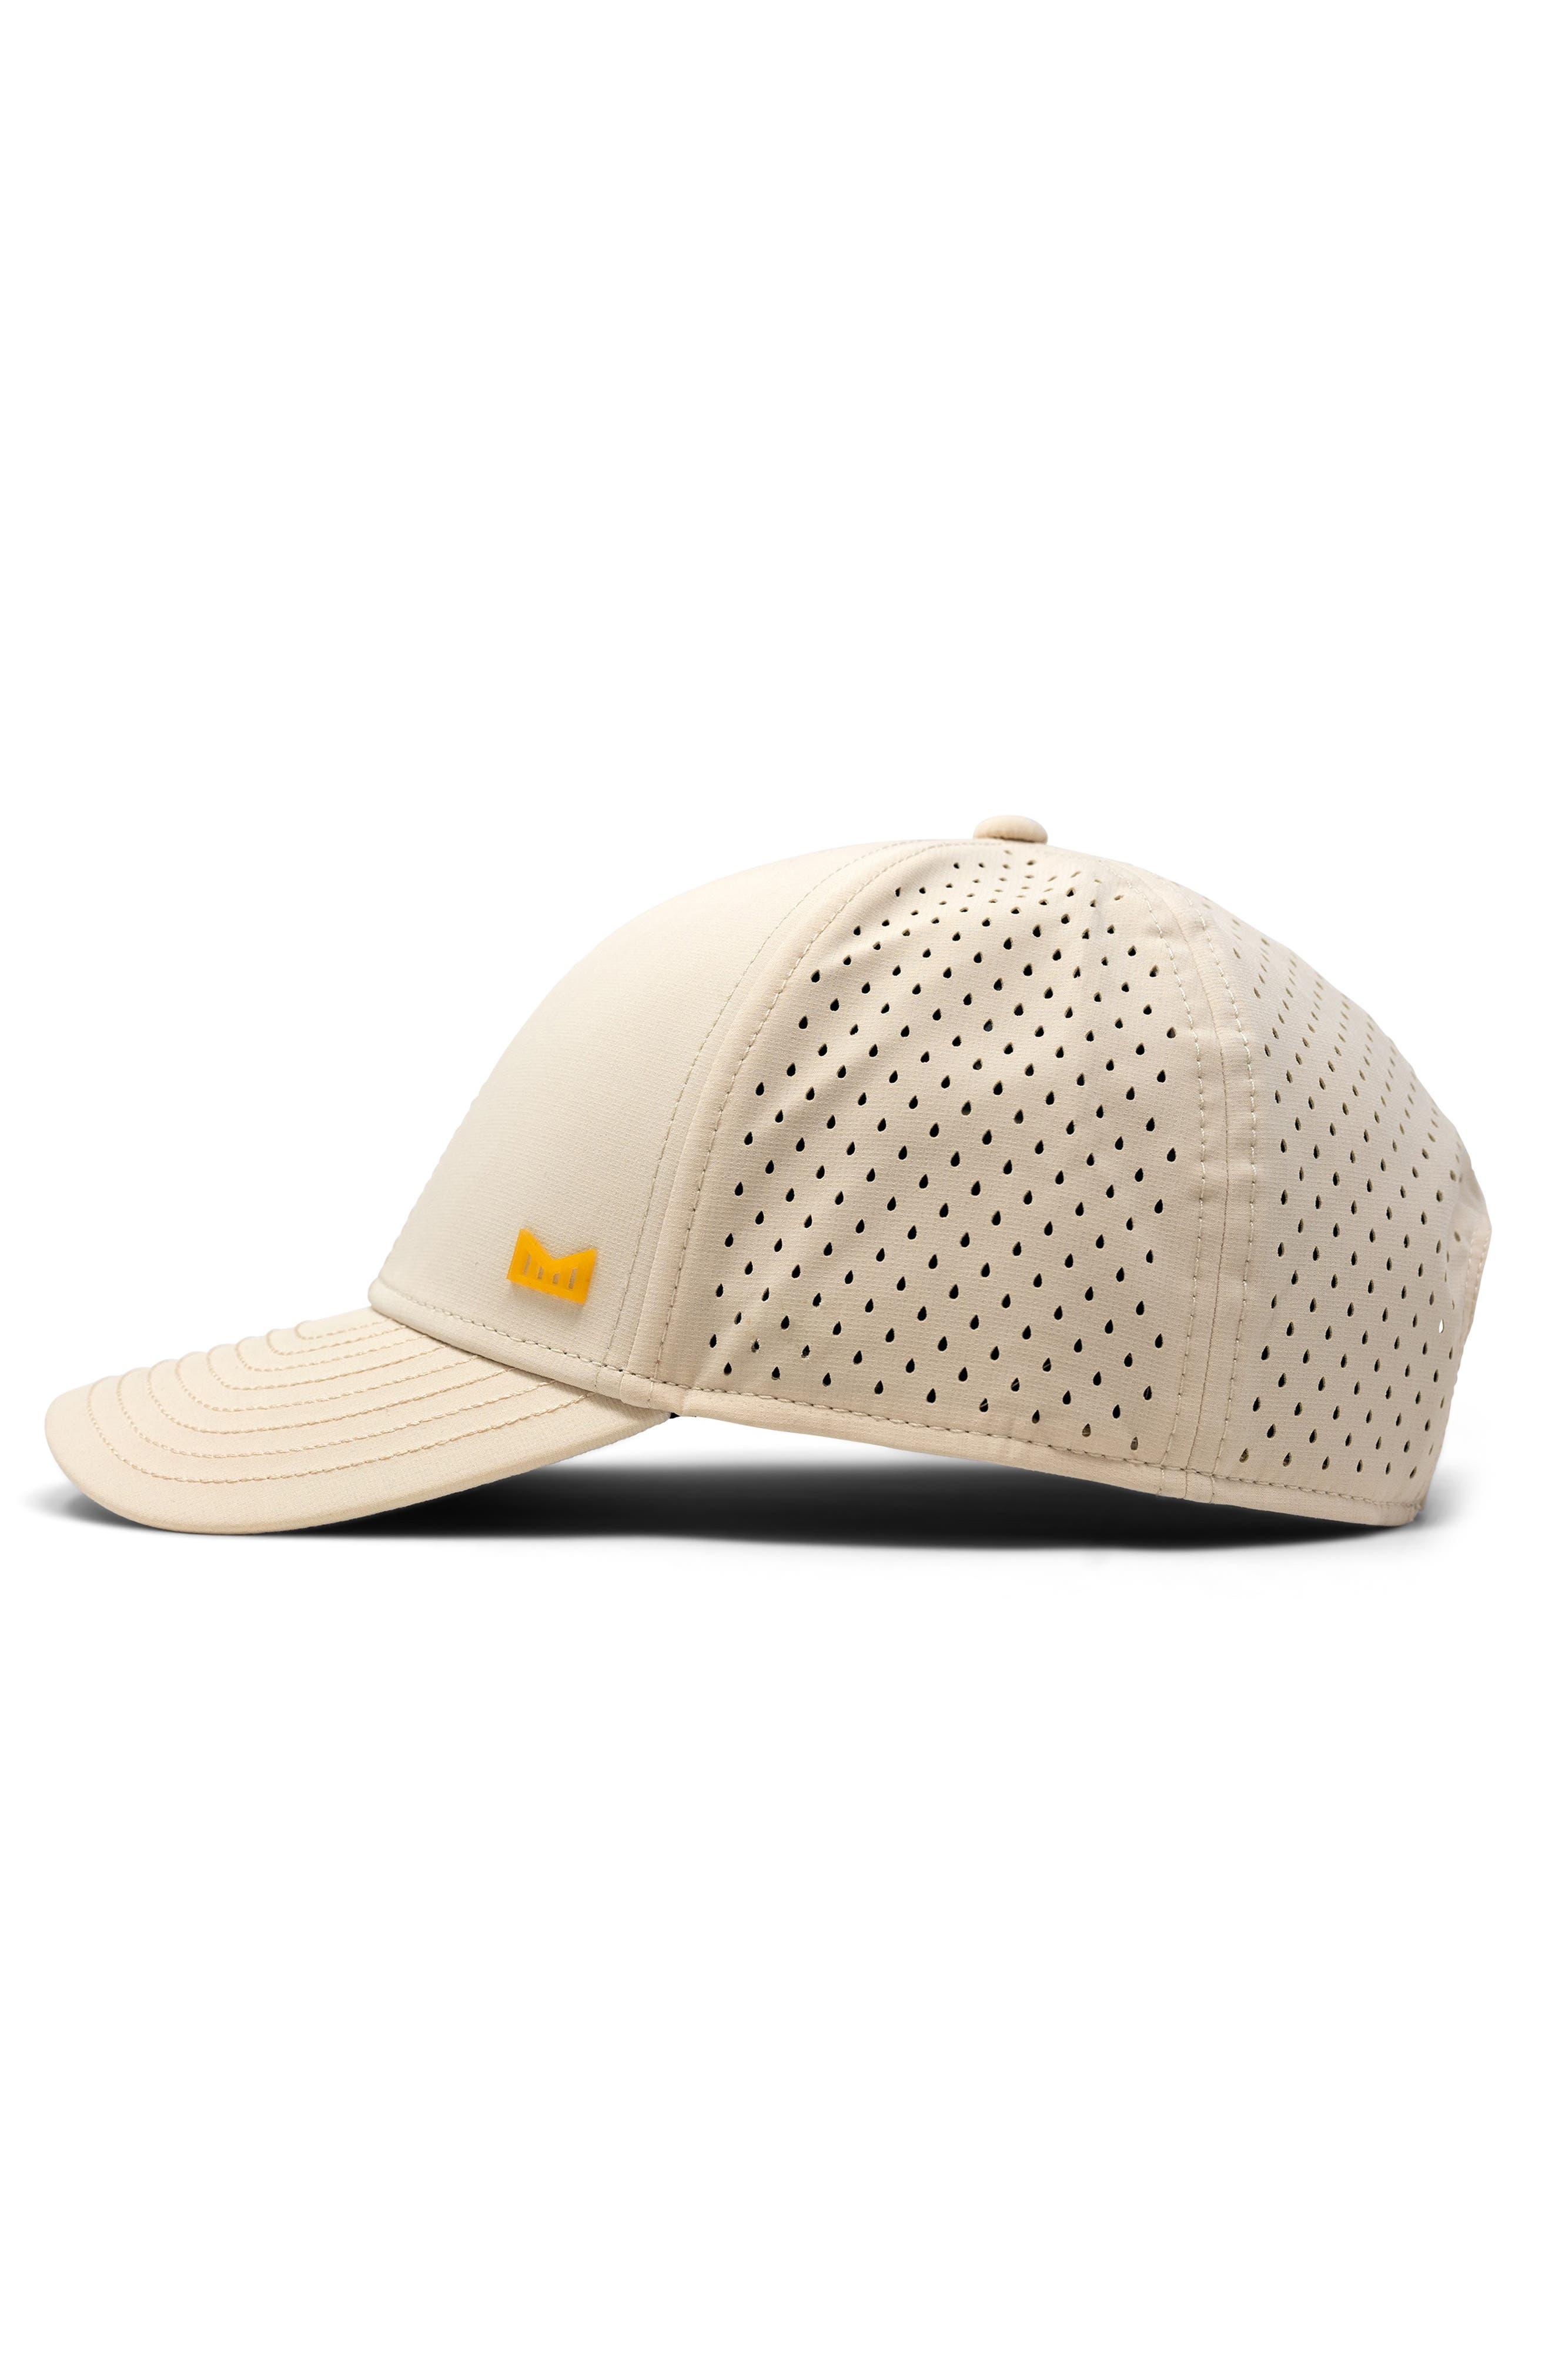 A-Game Hydro, Performance Snapback Hat